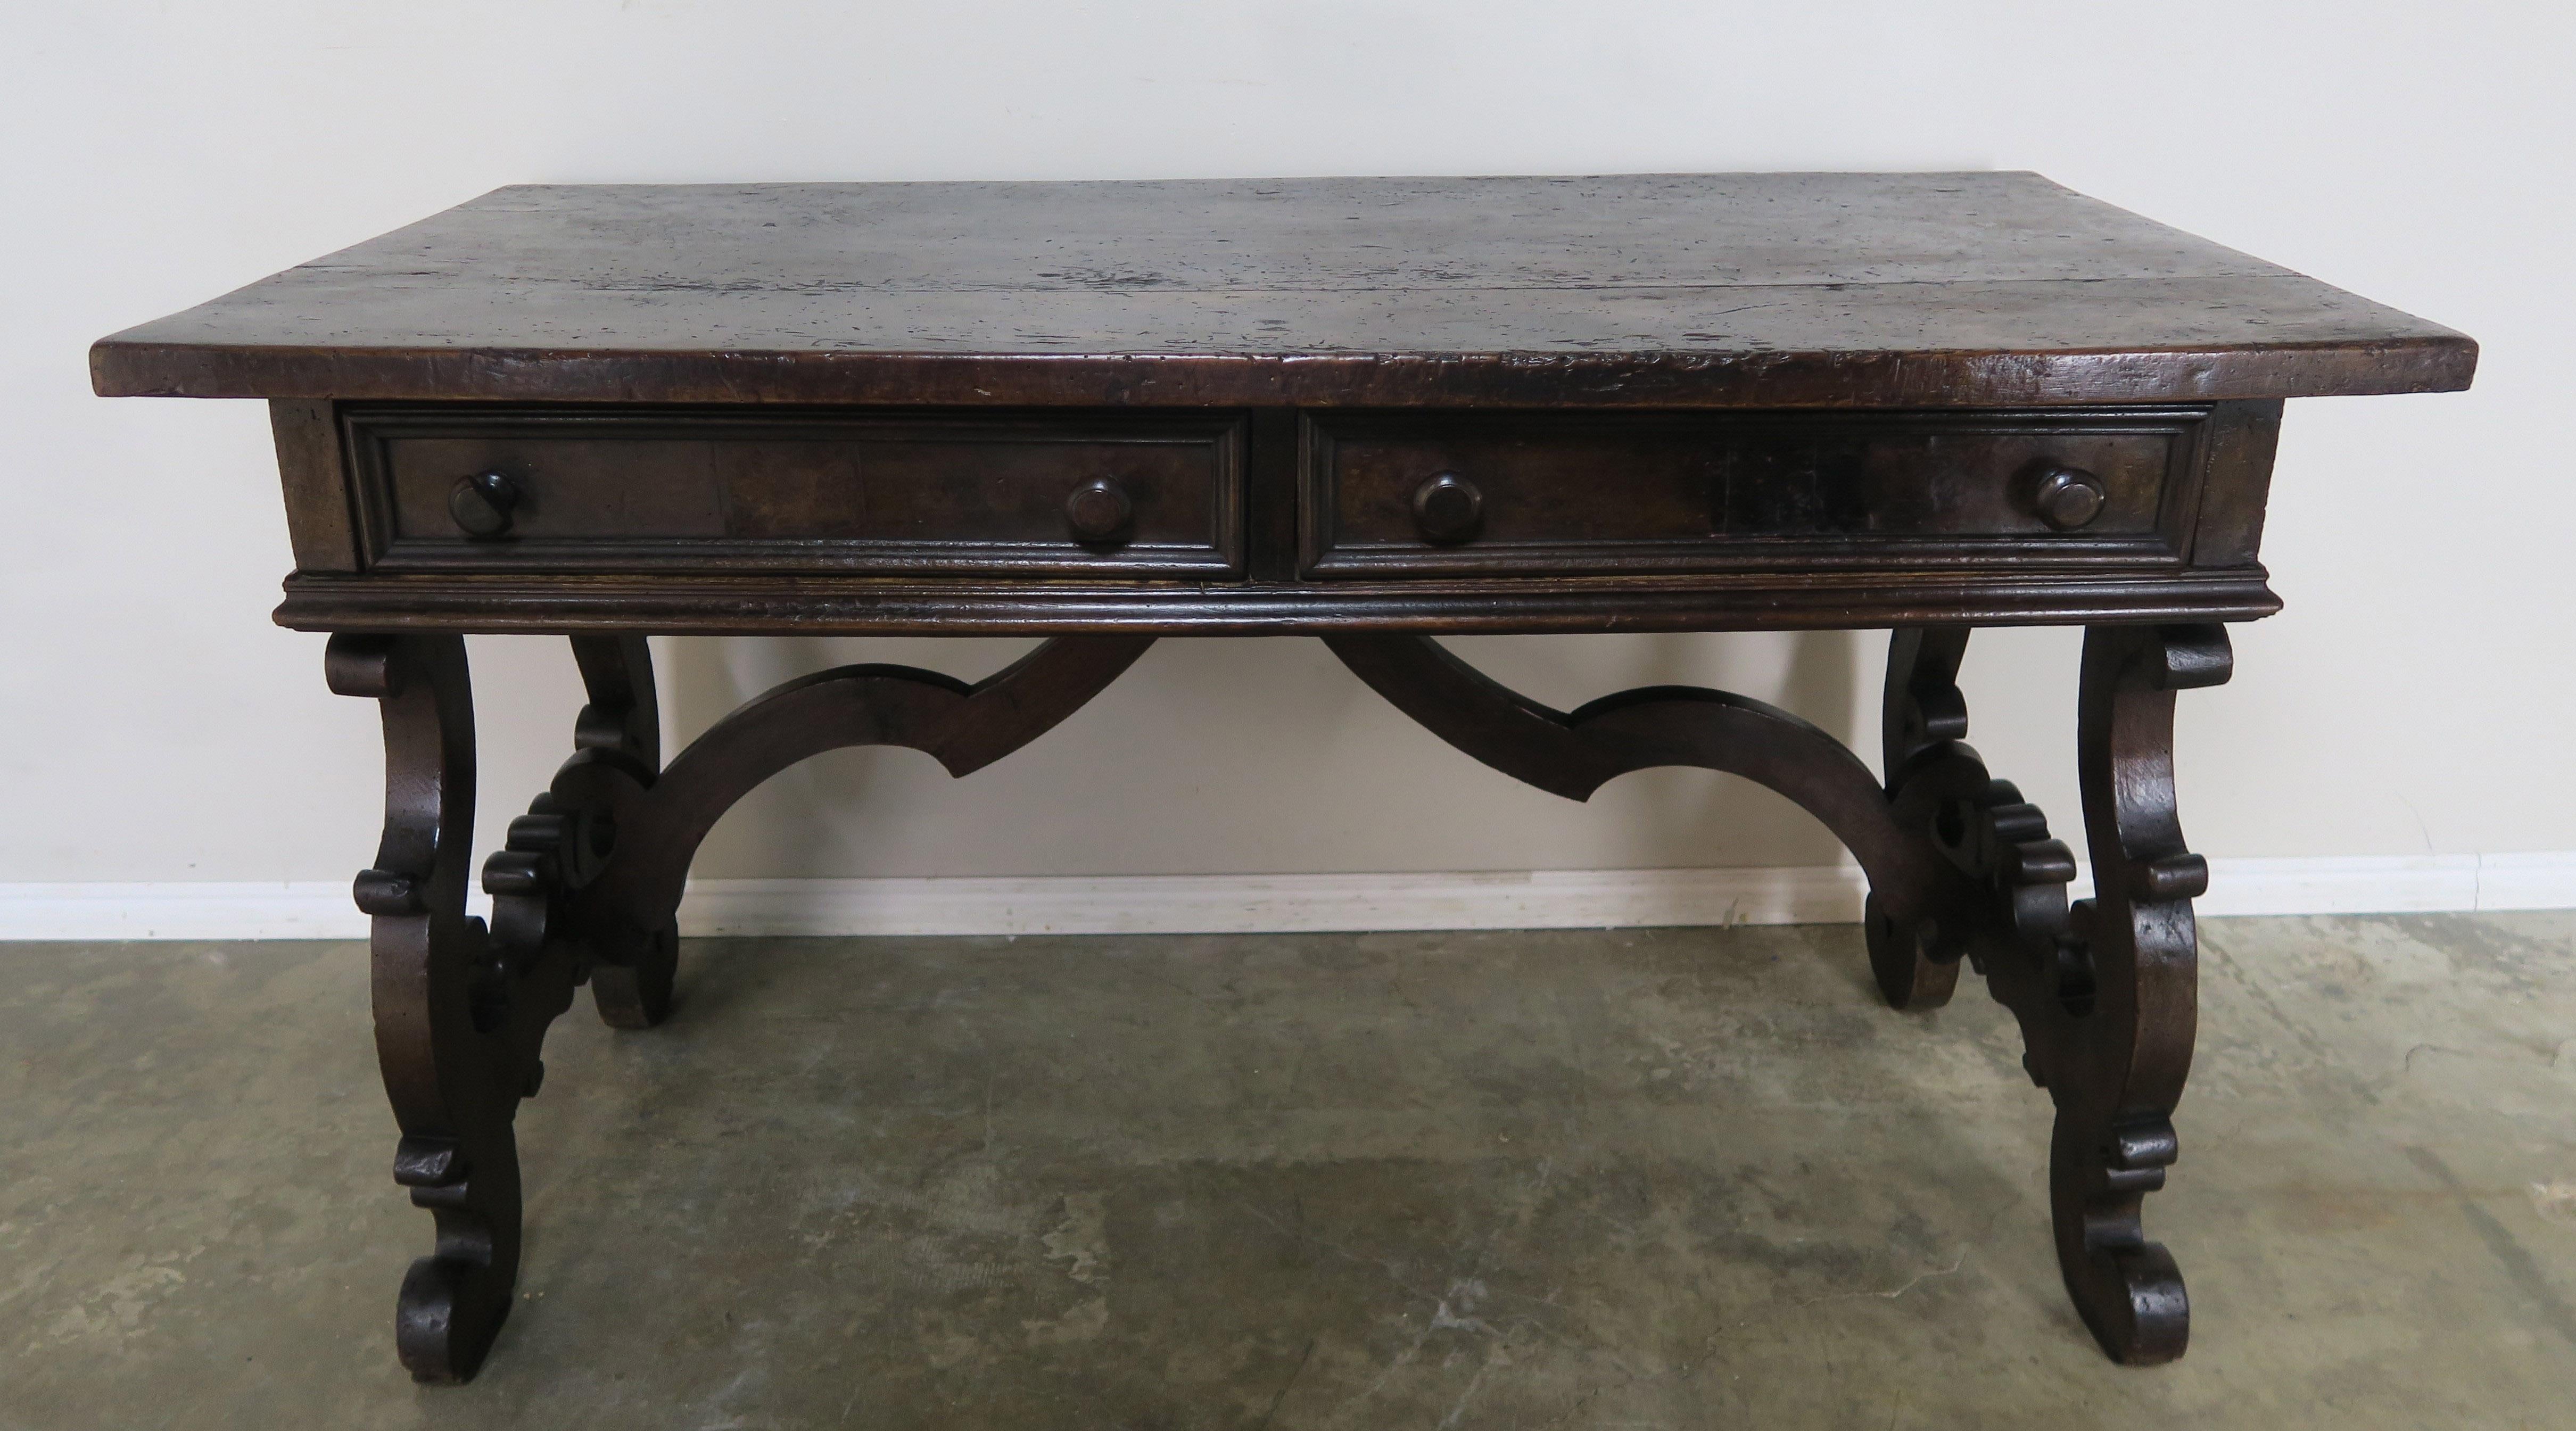 18th century Italian Renaissance style walnut writing table with two drawers. The table stands on two lyre shaped bases connected by a center stretcher.